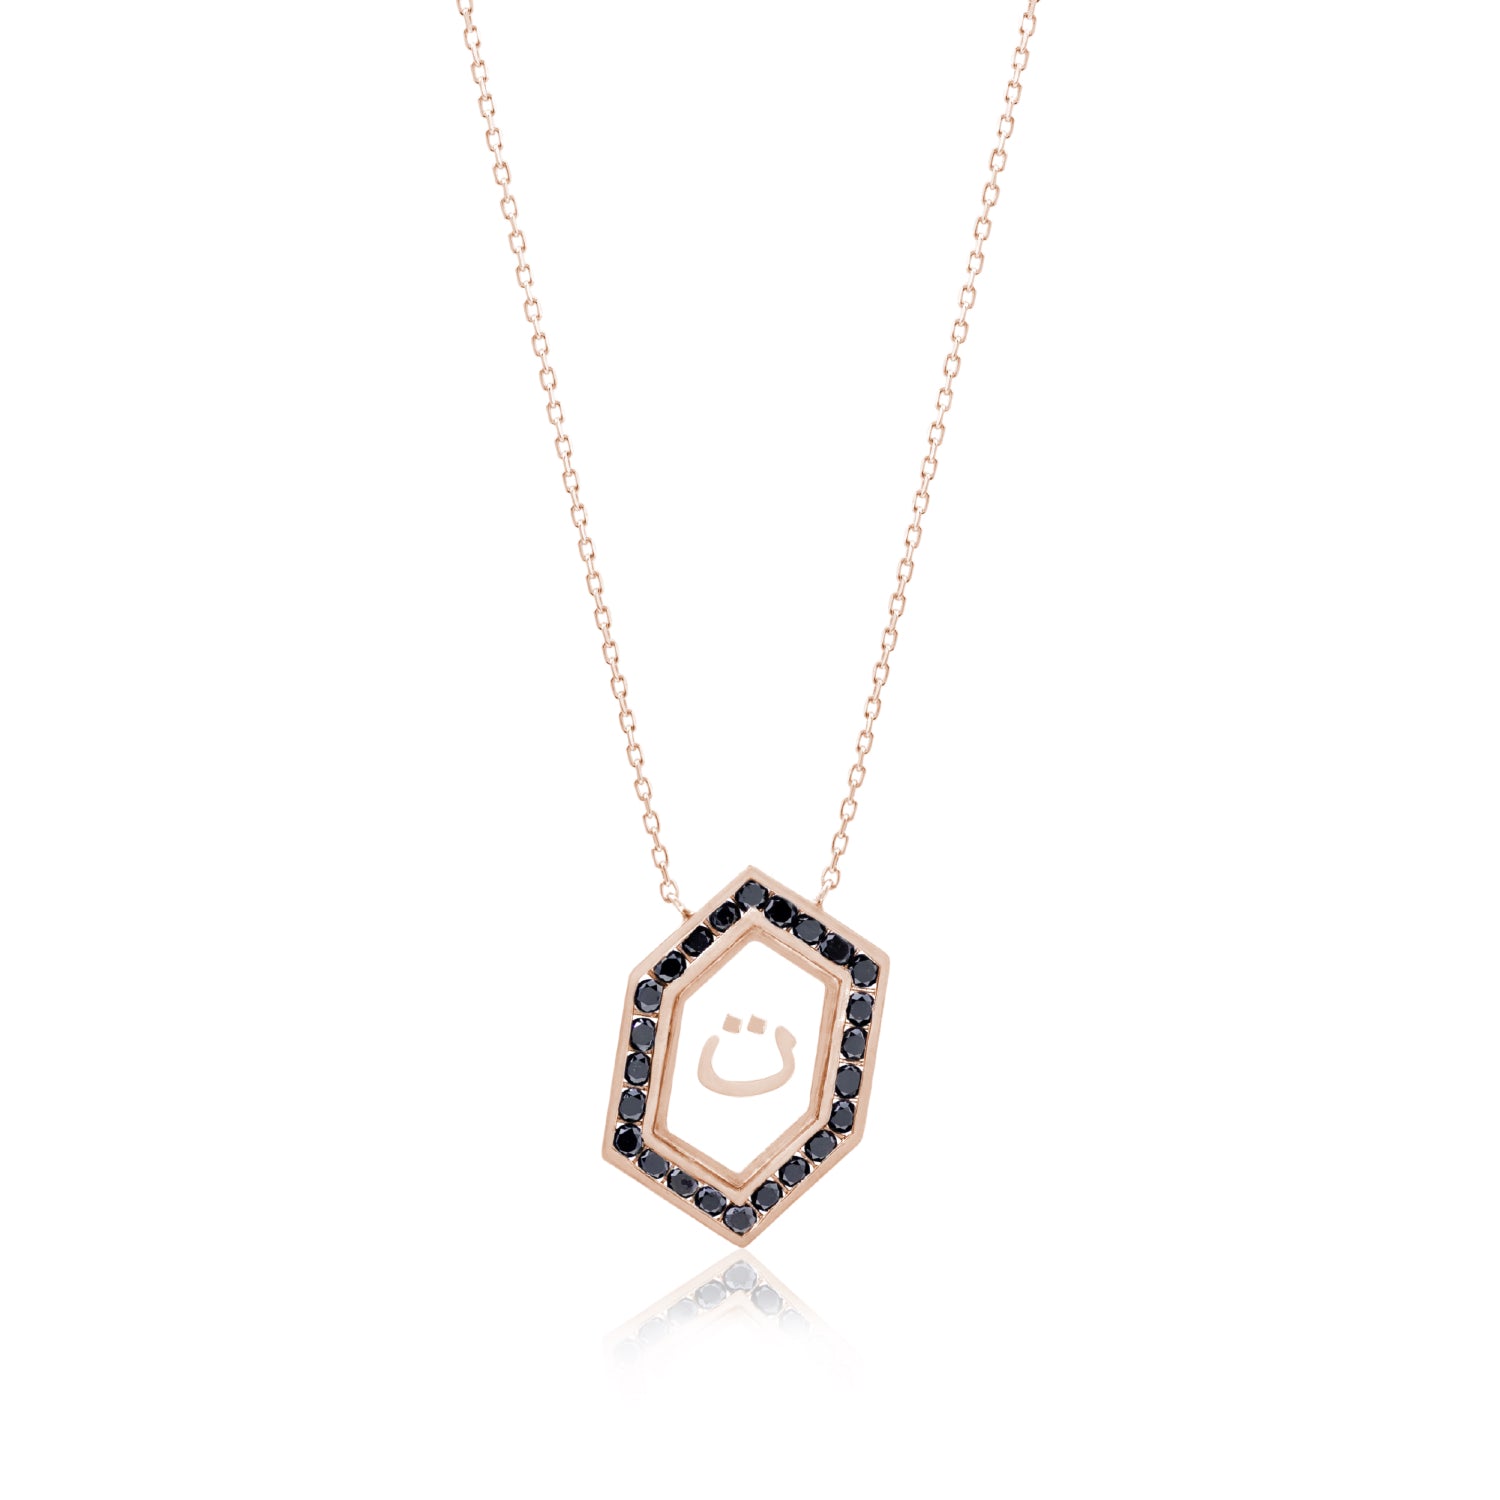 Qamoos 1.0 Letter ت Black Diamond Necklace in Rose Gold